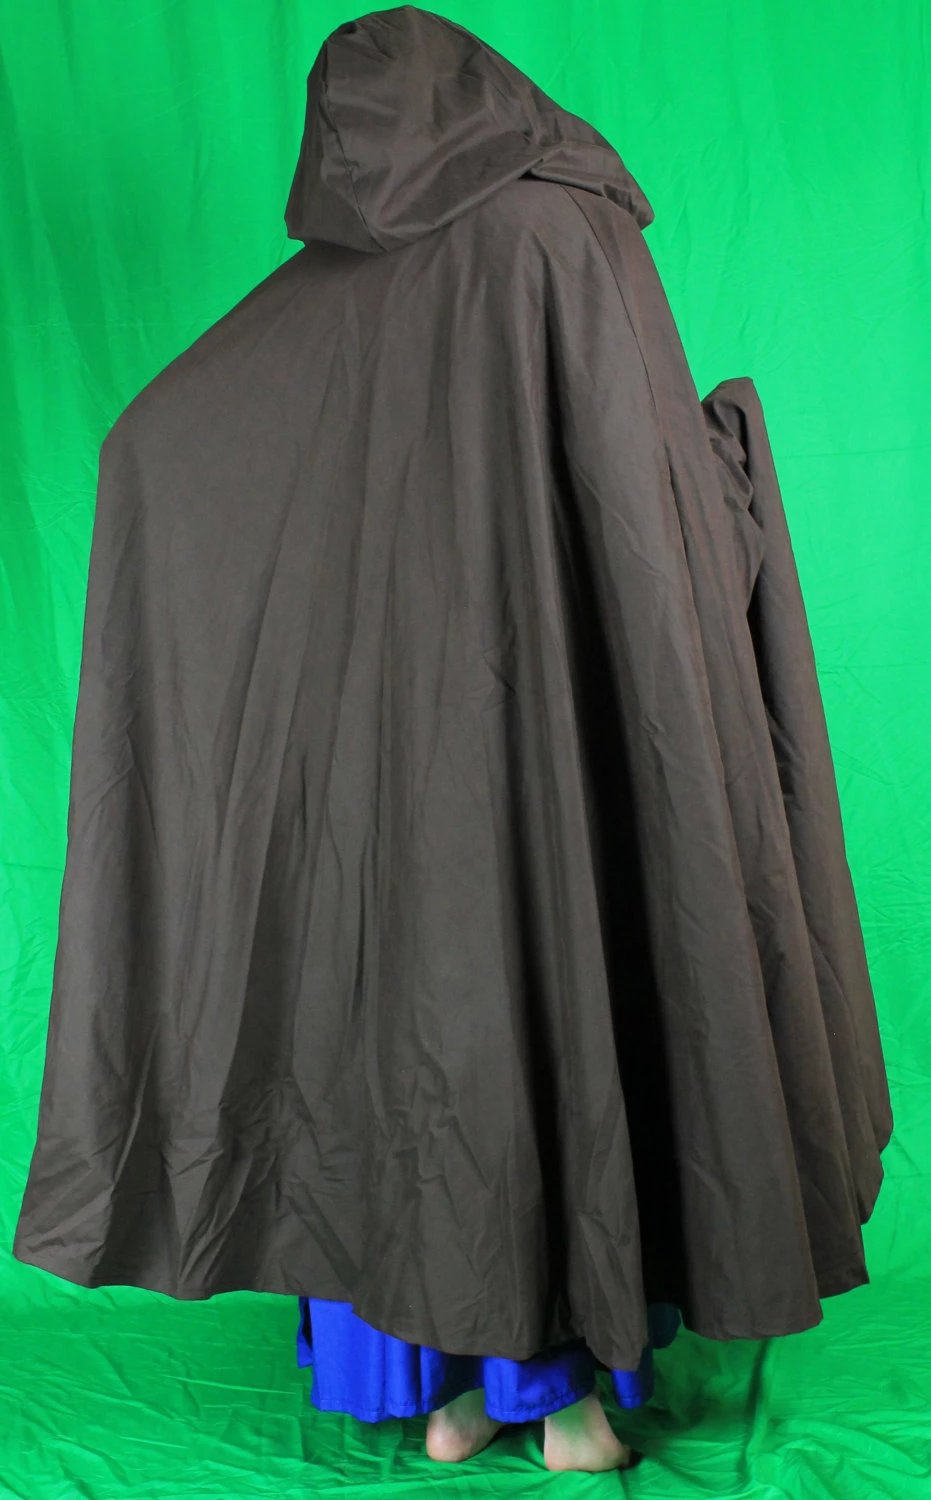 Hooded Cloak - In stock ready to ship – Garb the World